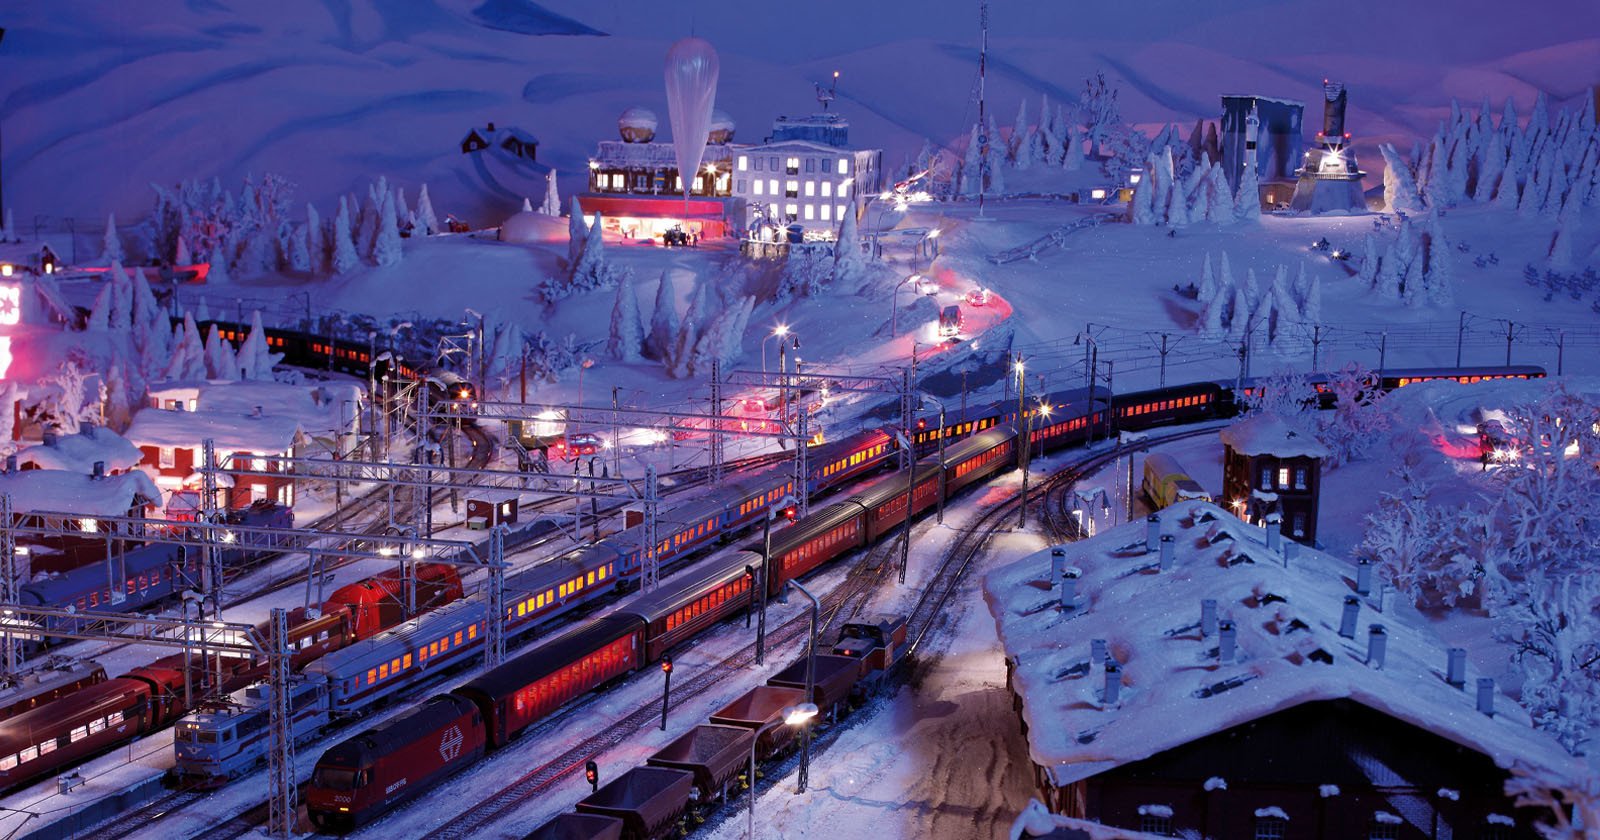 Take a Soothing 360-Degree Ride on the Worlds Largest Model Railway